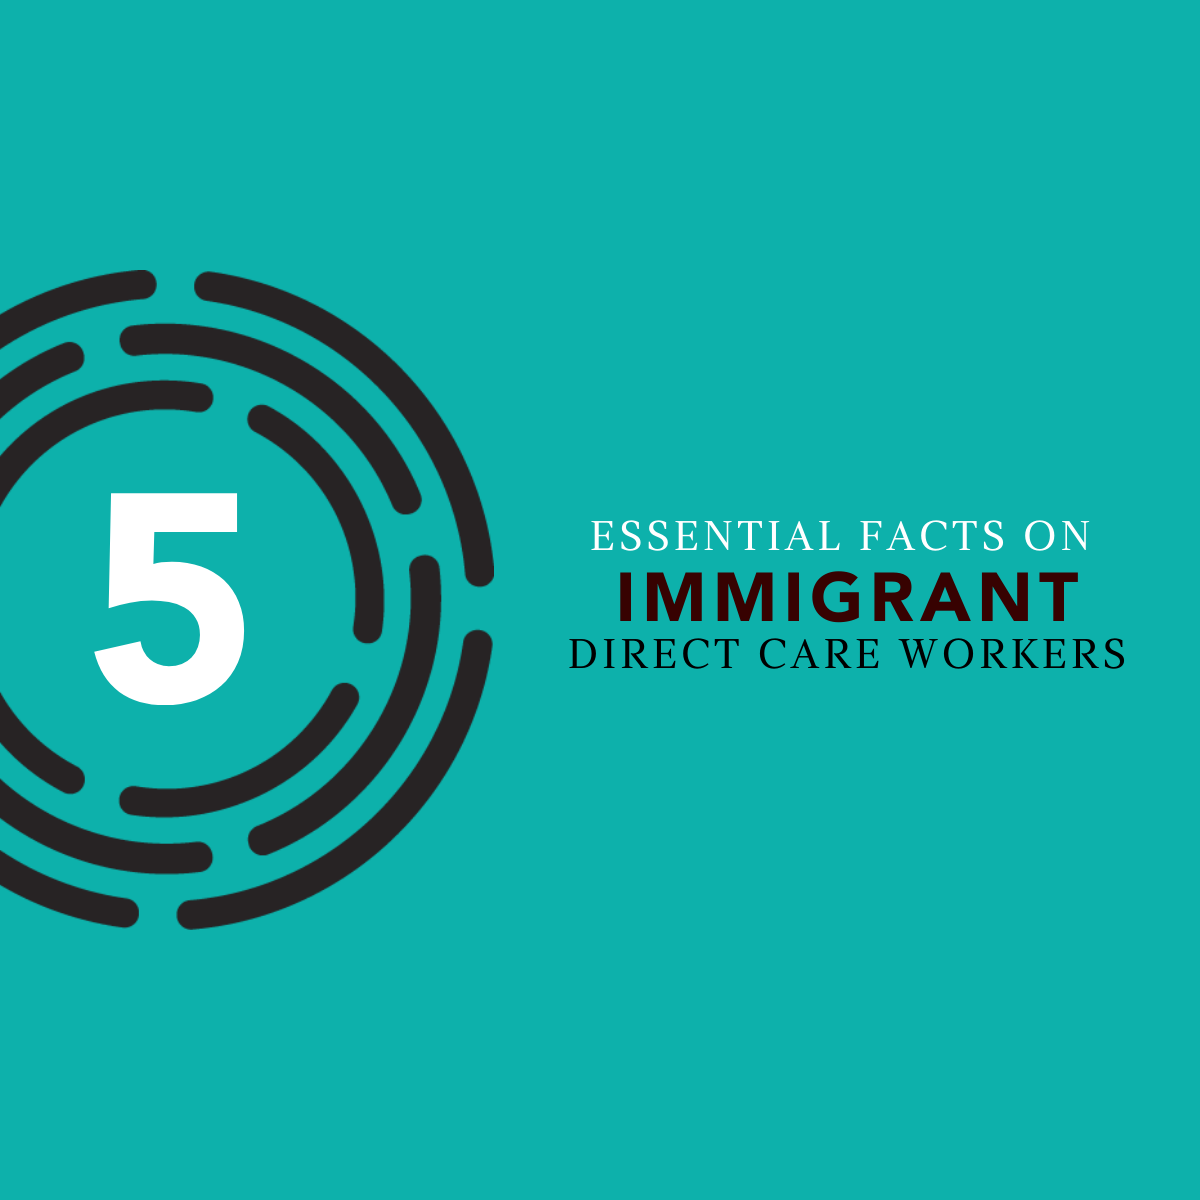 5 Essential Facts on Immigrant Direct Care Workers